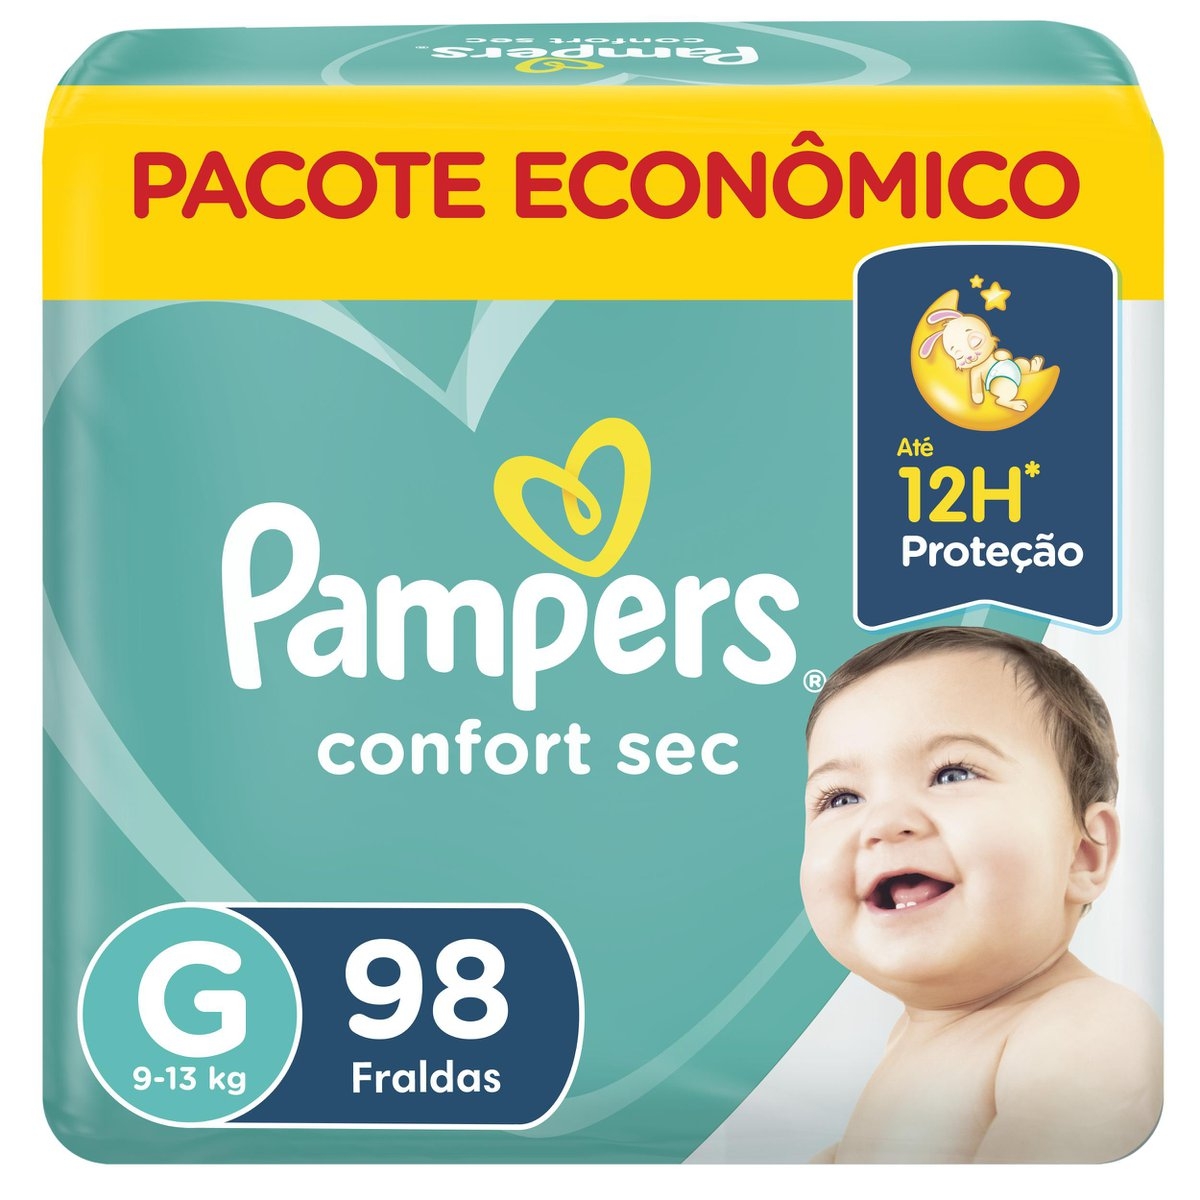 canon pixma g3000 pampers